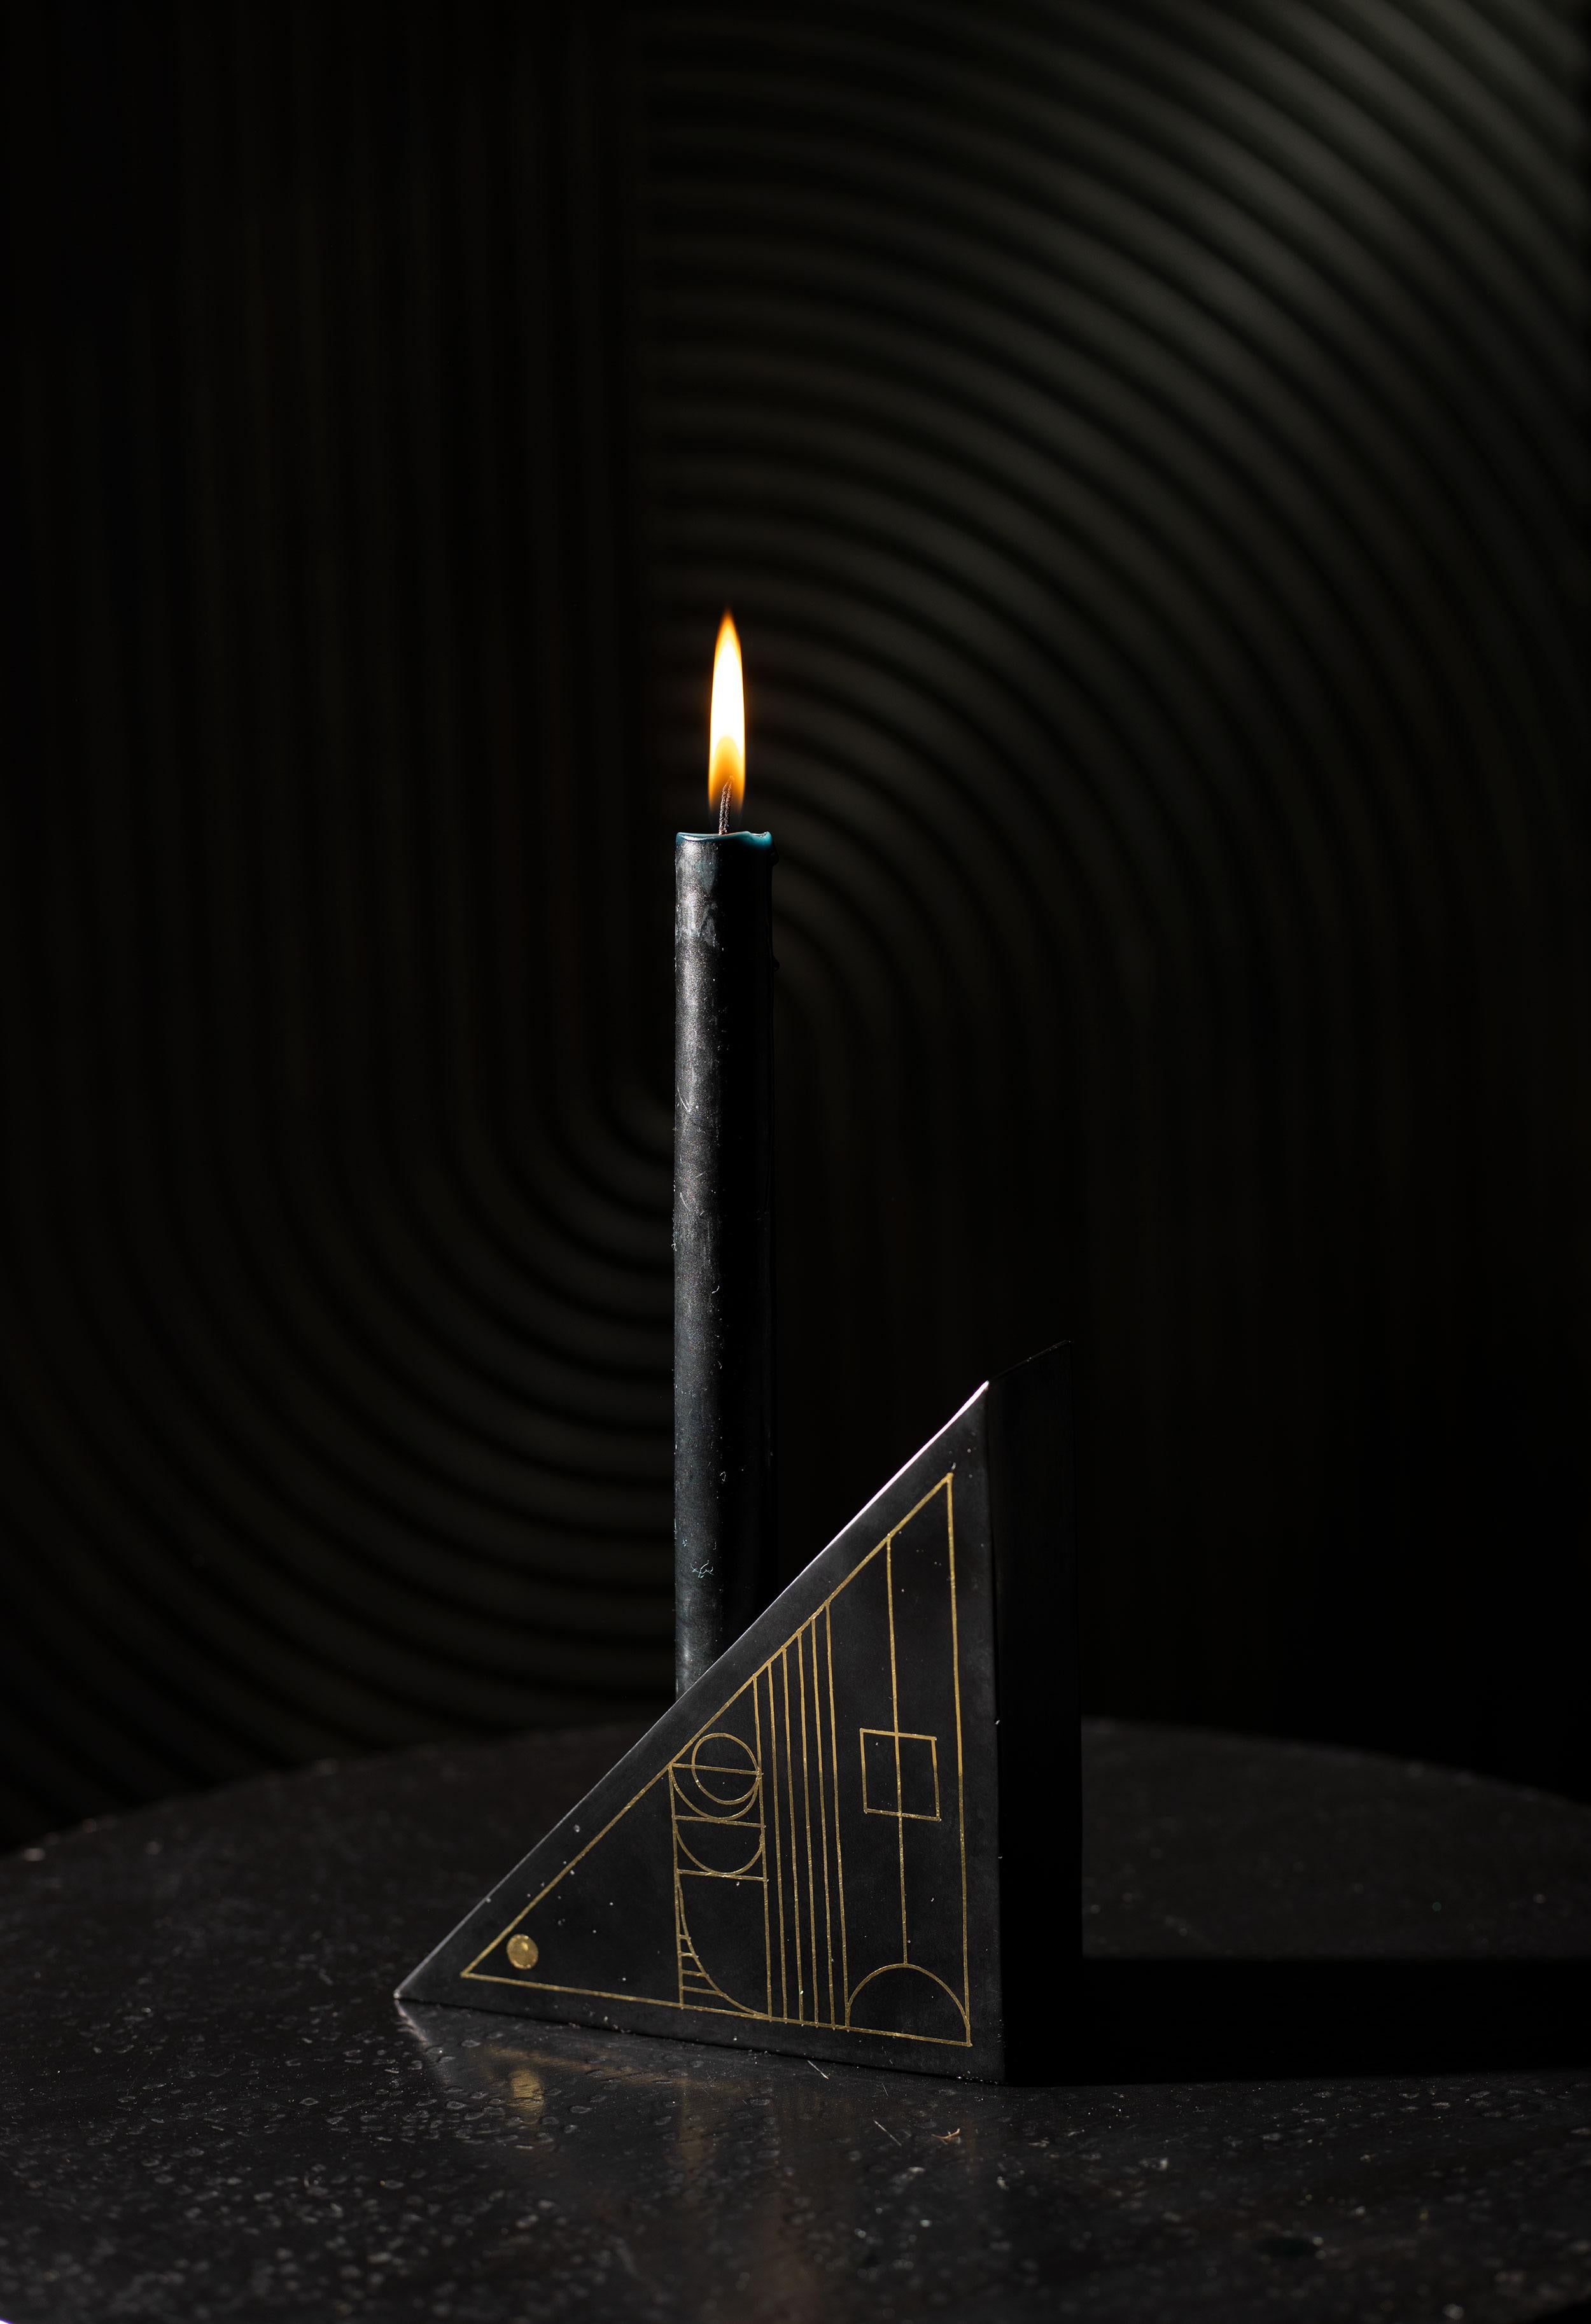 Our Art Deco-inspired candleholders are ethically handcrafted by artisans in Southern India using a technique that is native to the region. The artisans use a metal alloy that is blackened with a locally found soil, and the piece is inlaid with